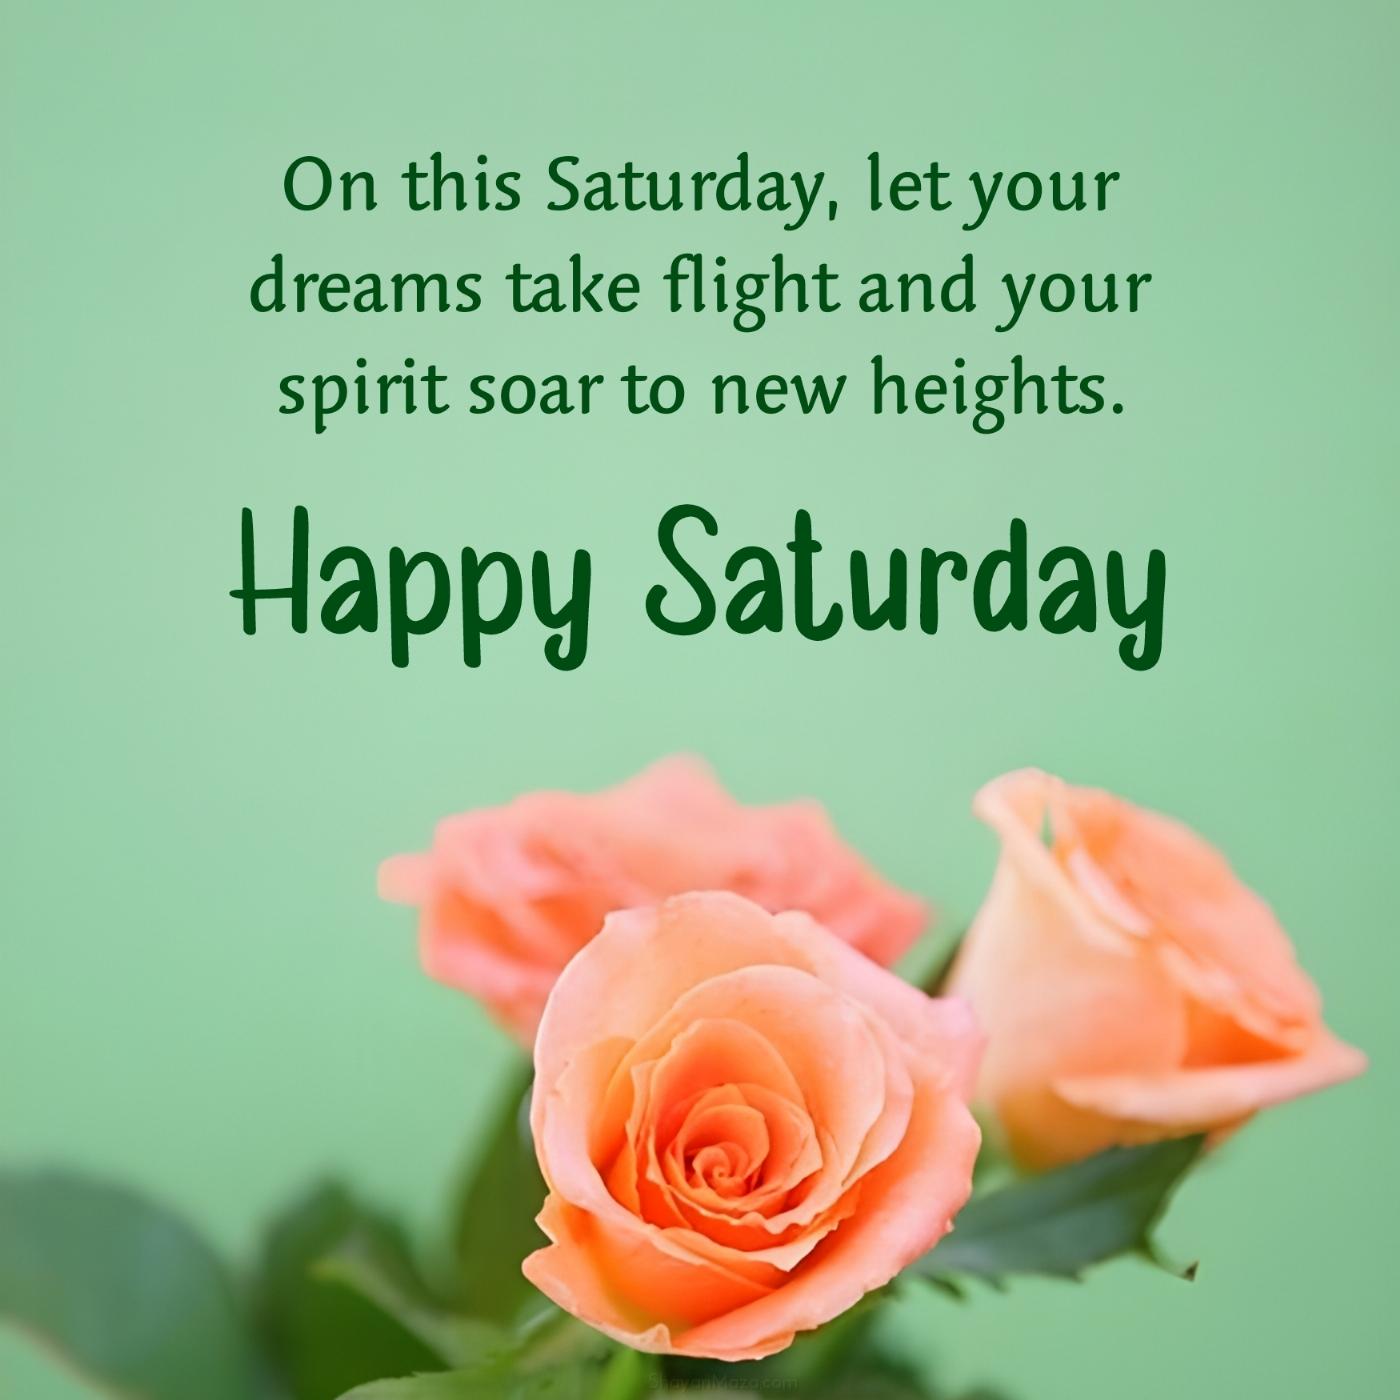 On this Saturday let your dreams take flight